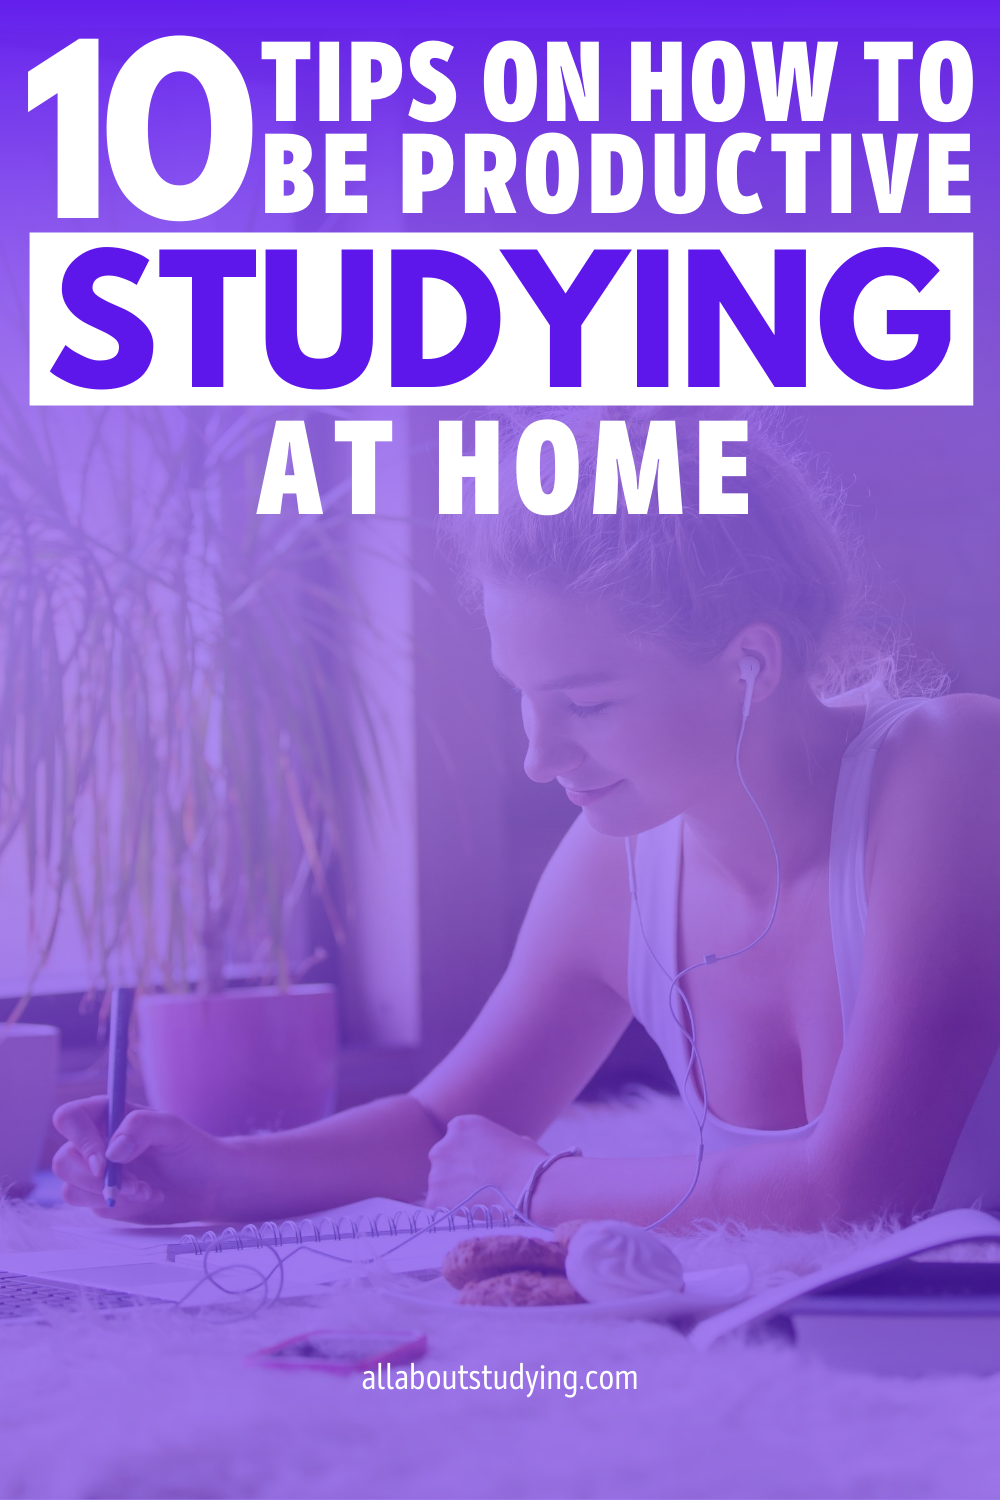 Effective Tips On How To Be Productive Studying At Home, advice for studying remotely #studying #studyblr #studymotivation #studynotes #sutdytime